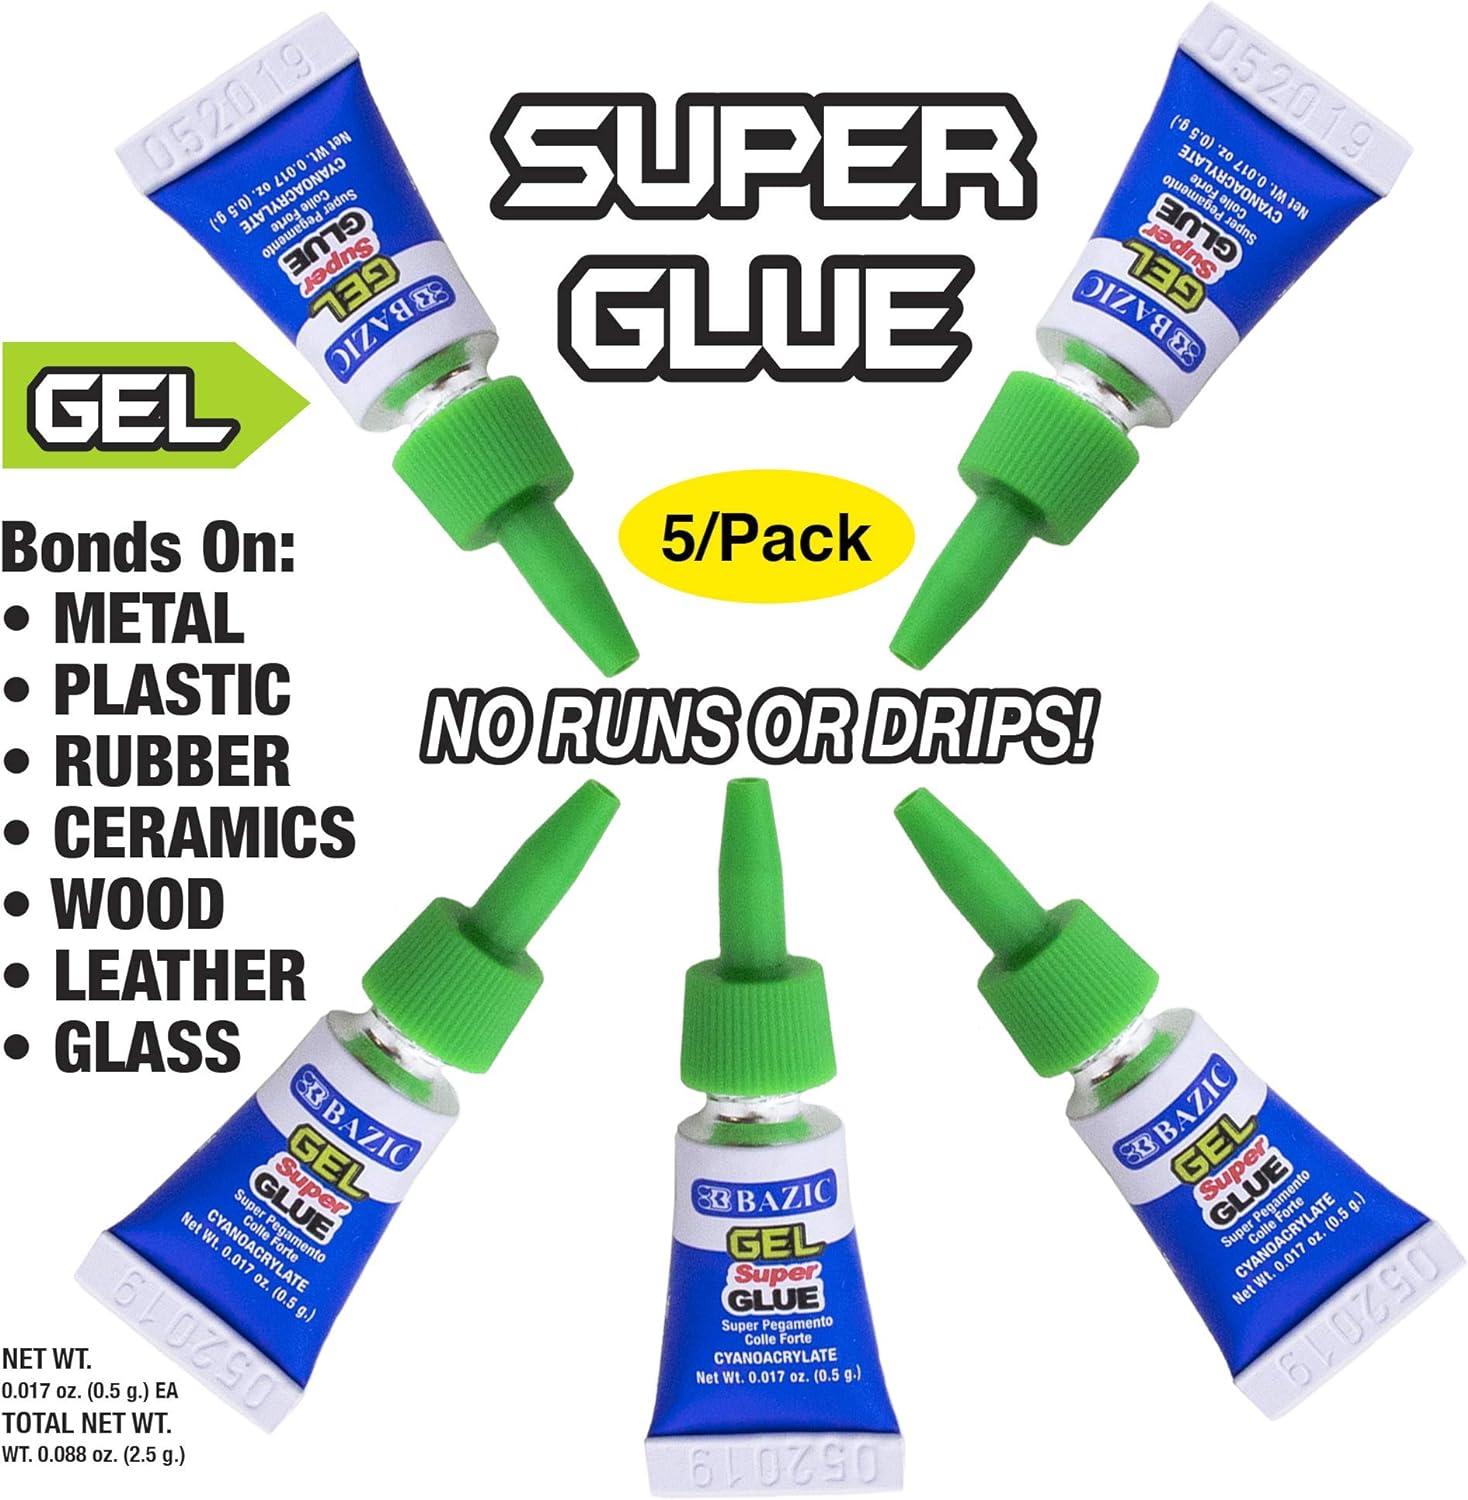 BRAND NEW INSTANT KRAZY GLUE GEL ALL PURPOSE ADHESIVE ADHESION